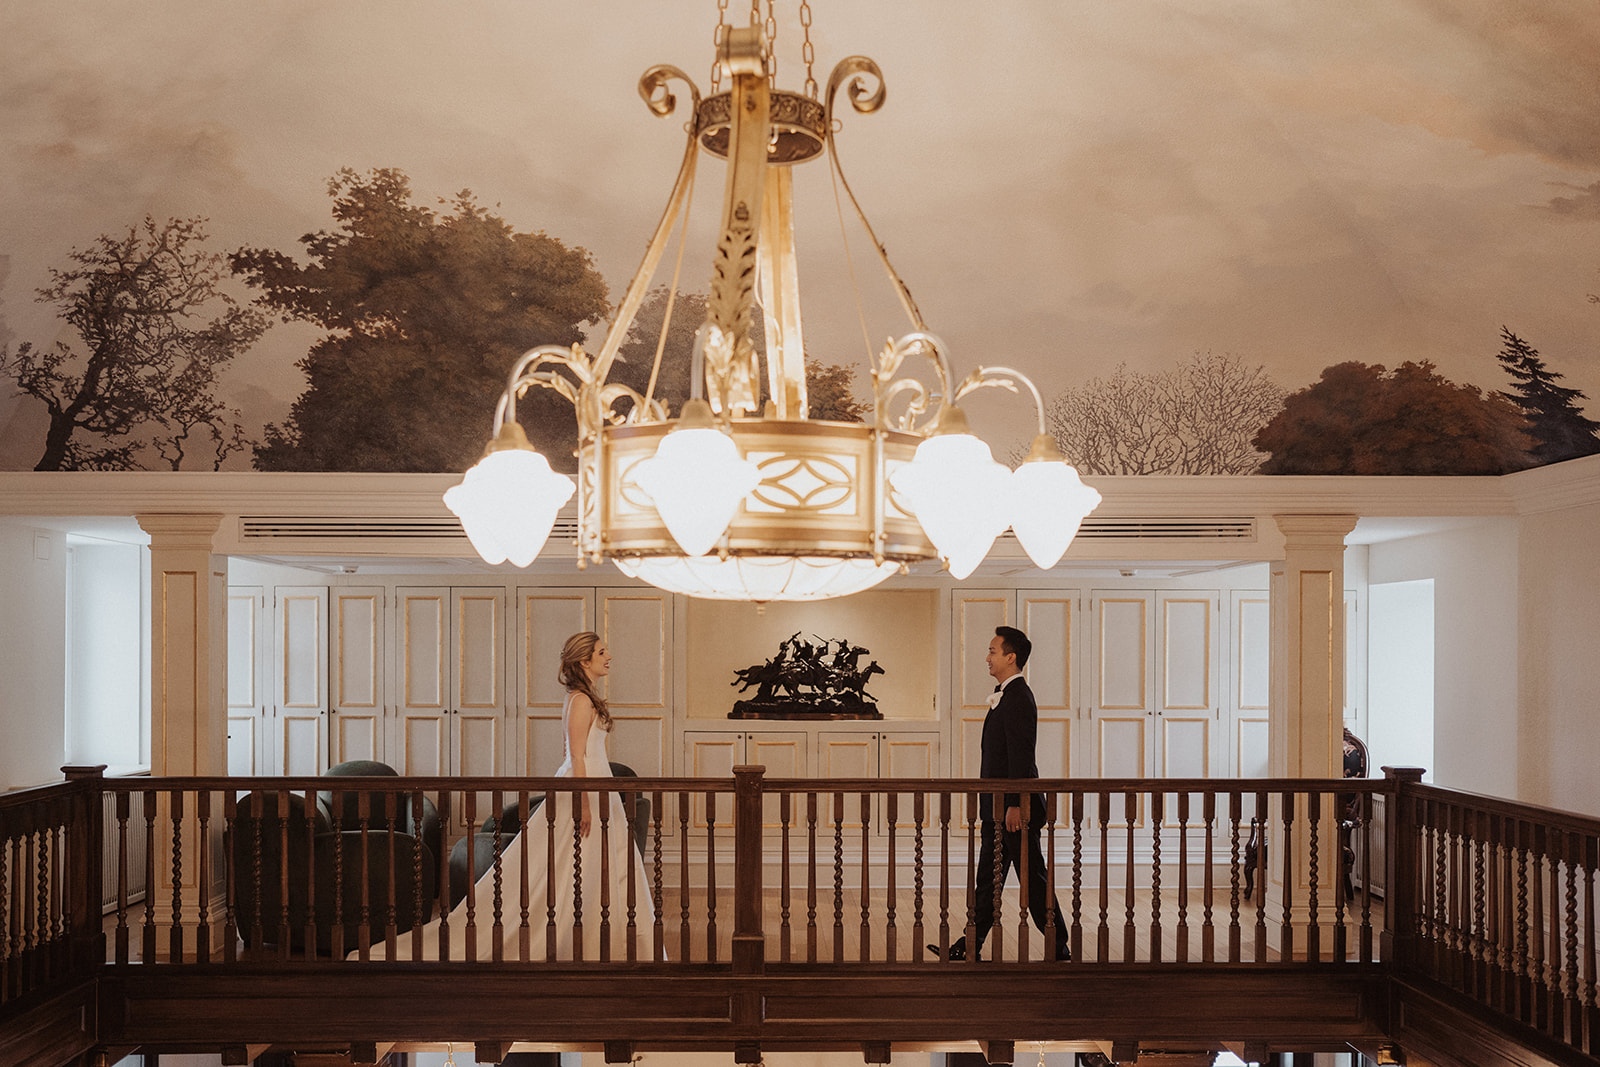 Couple under chandelier, wide shot with balanced symmetry.